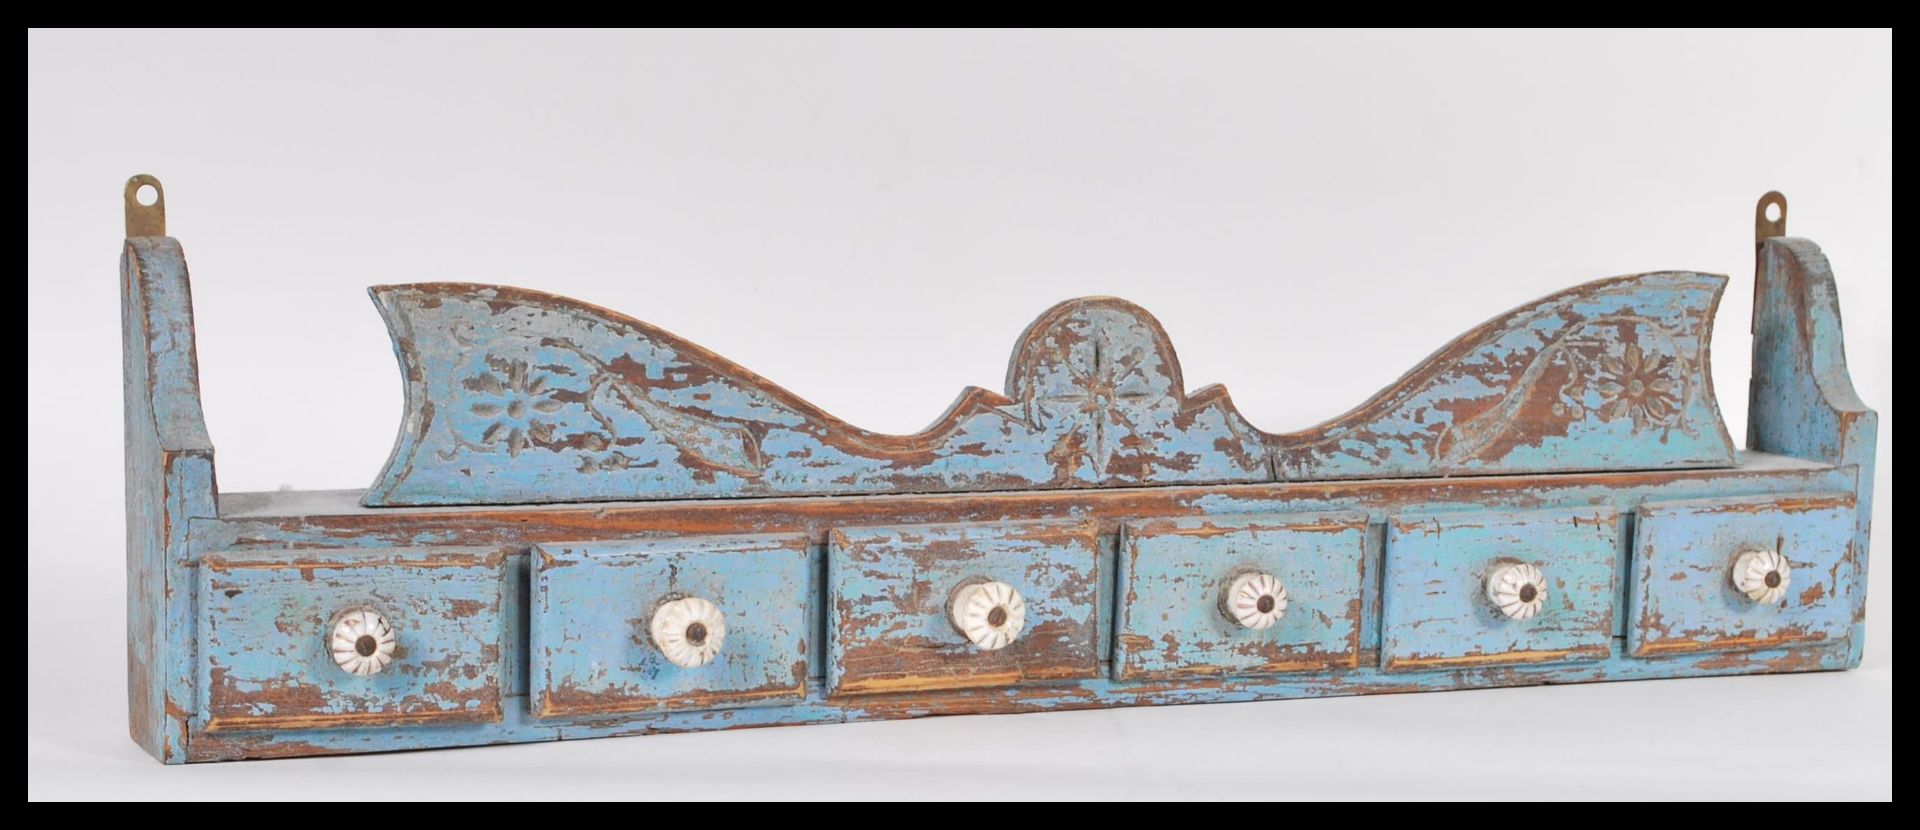 A vintage 20th Century wall hanging painted distressed pine spice shelf. The shelf having a run of